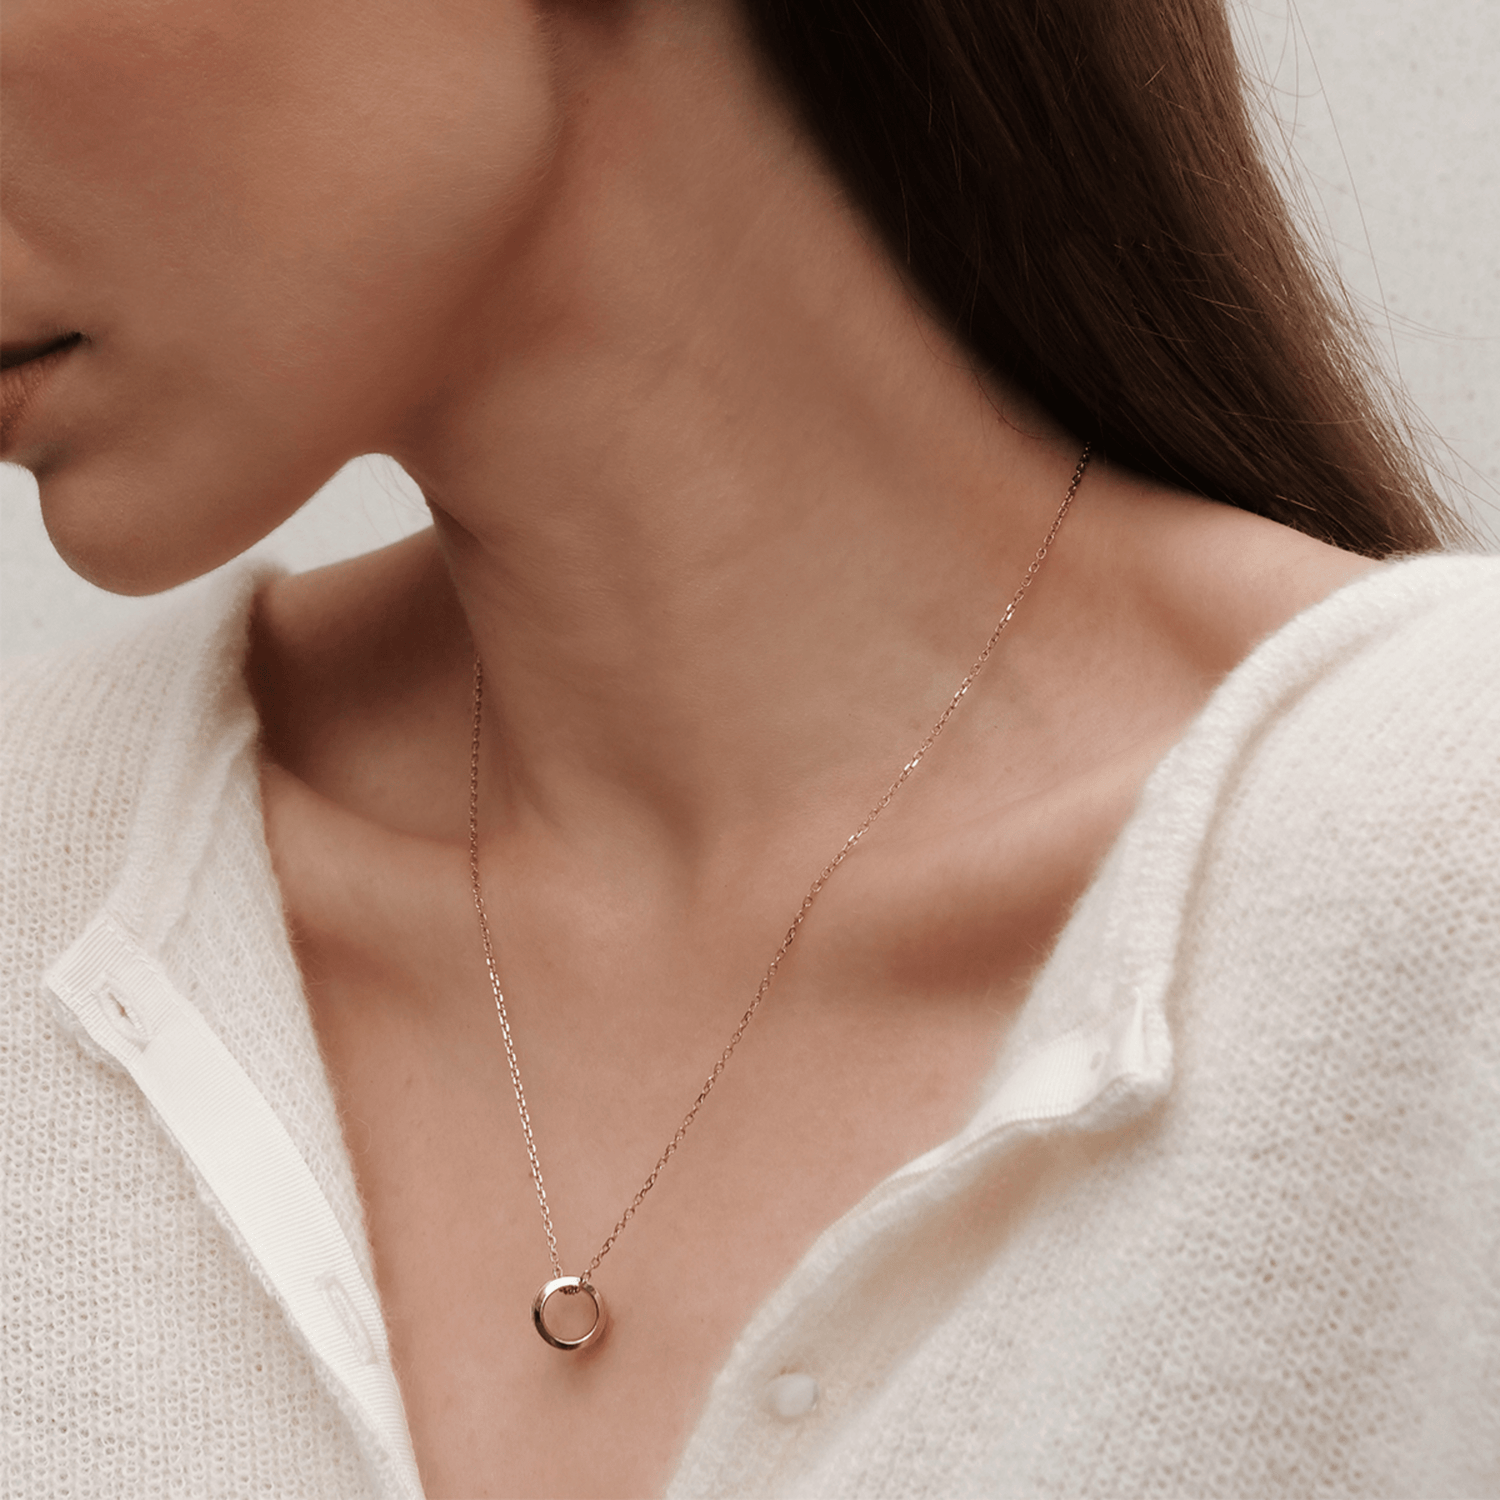 Jewellery - Elan Necklace in rose gold one size | DW